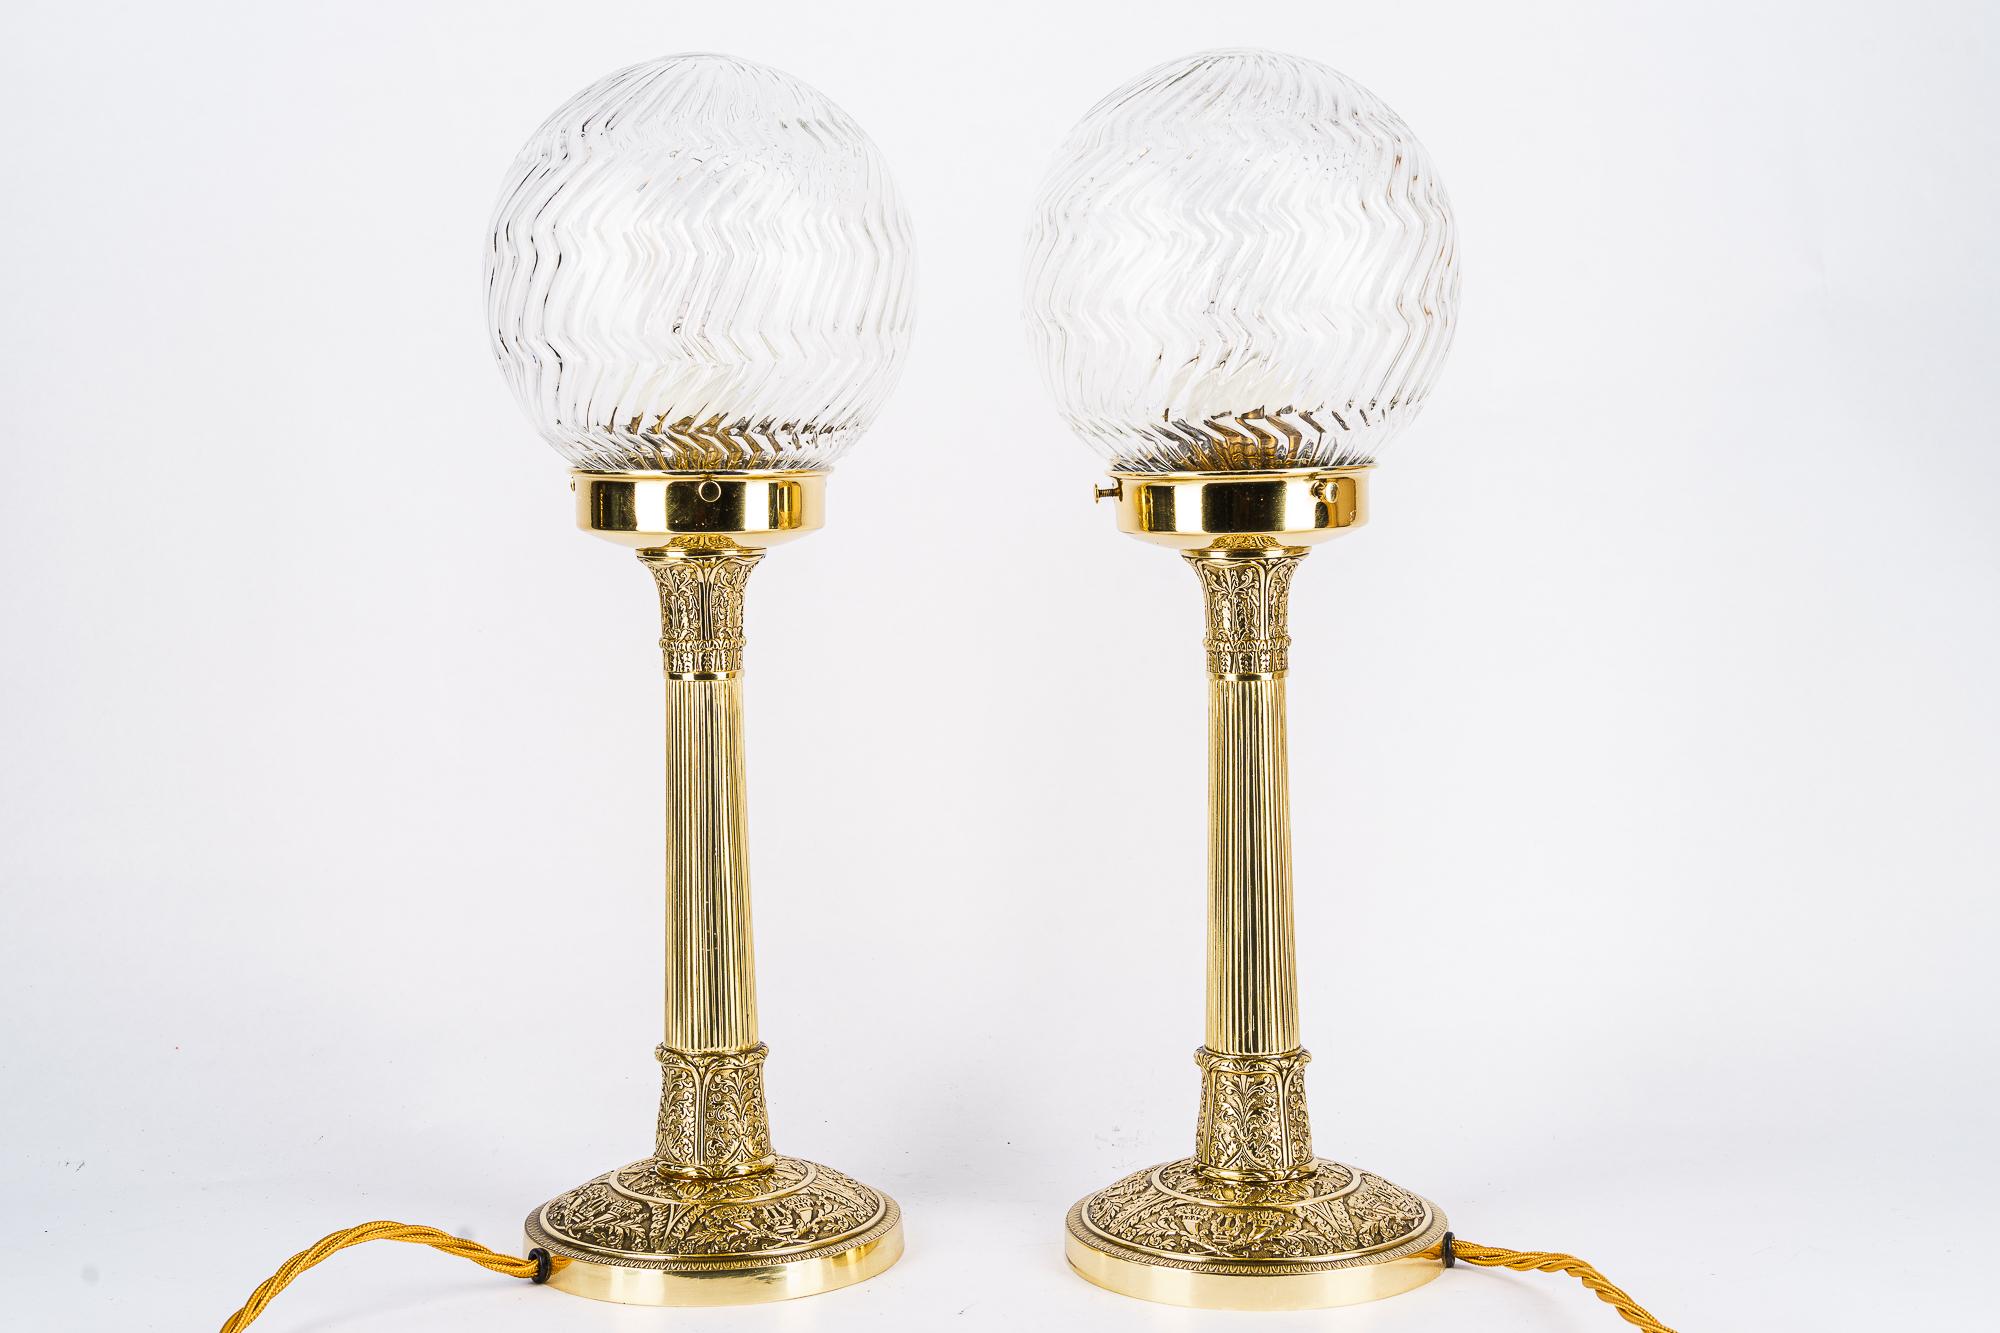 2 Art Deco Table lamps with glass shades vienna around 1920s
Brass polished and stove enameled
Original antique glass shades